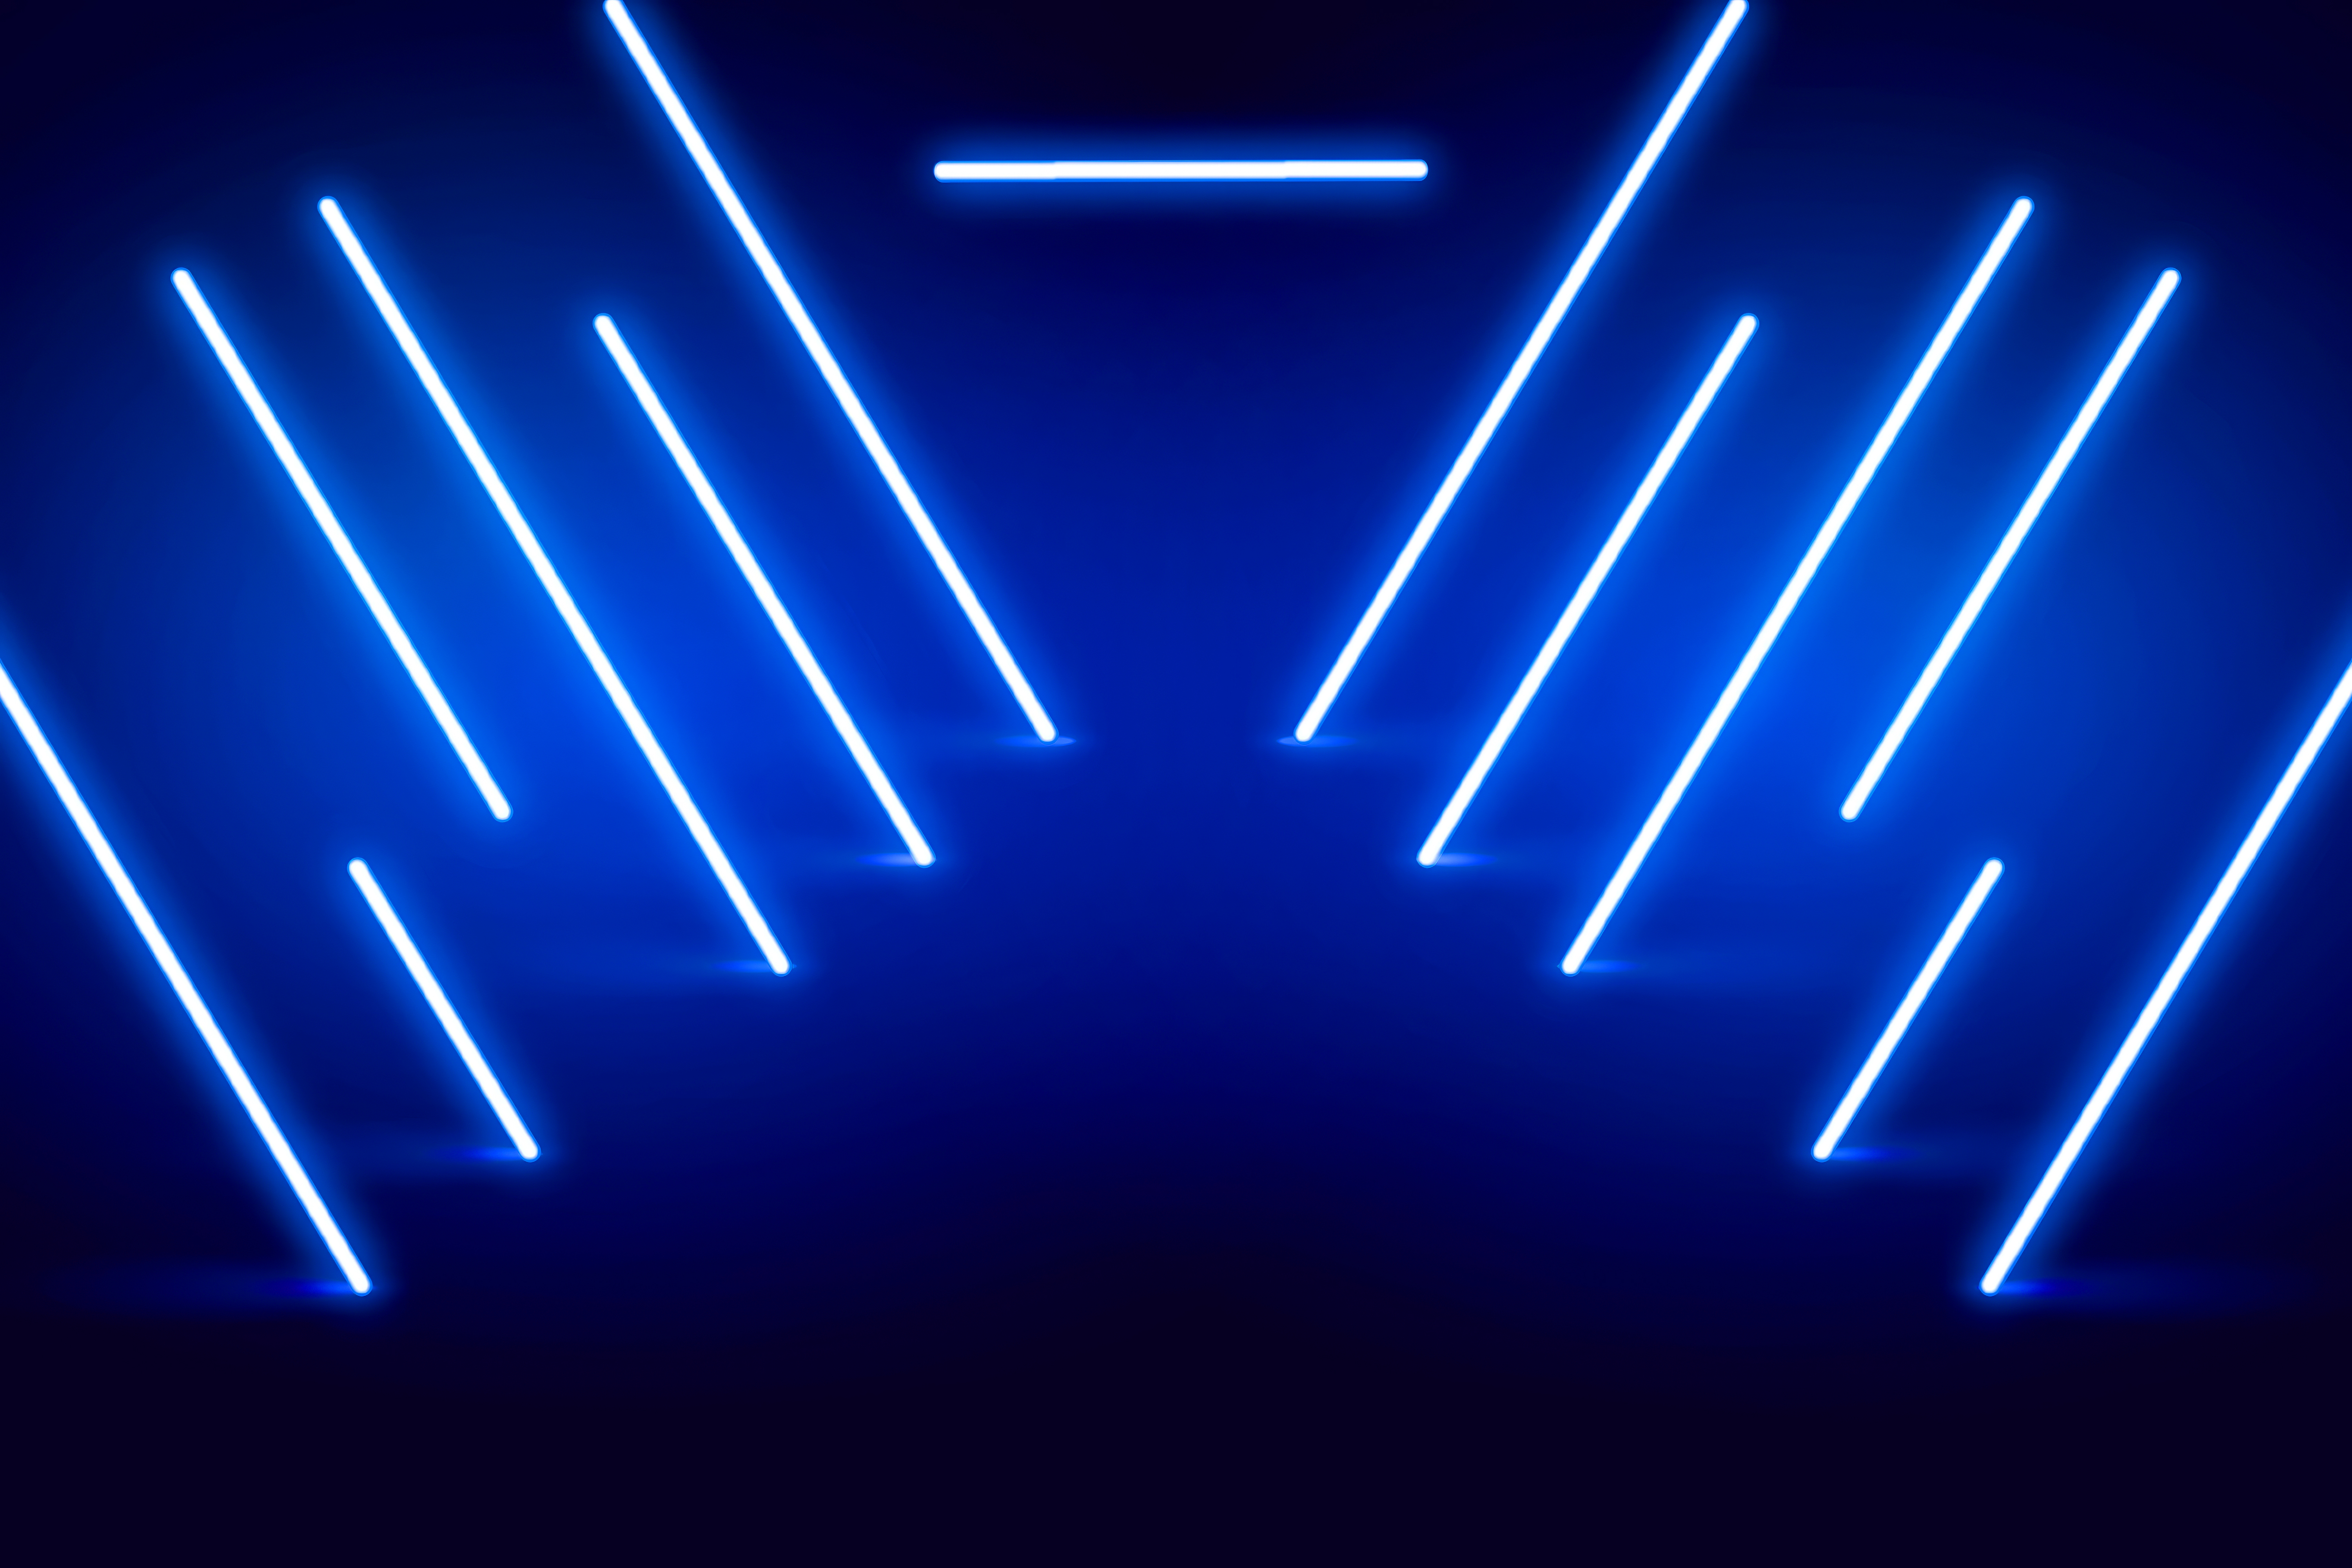 Blue Neon Lights Bright White Blue Background Abstract Digital Art 6000x4000